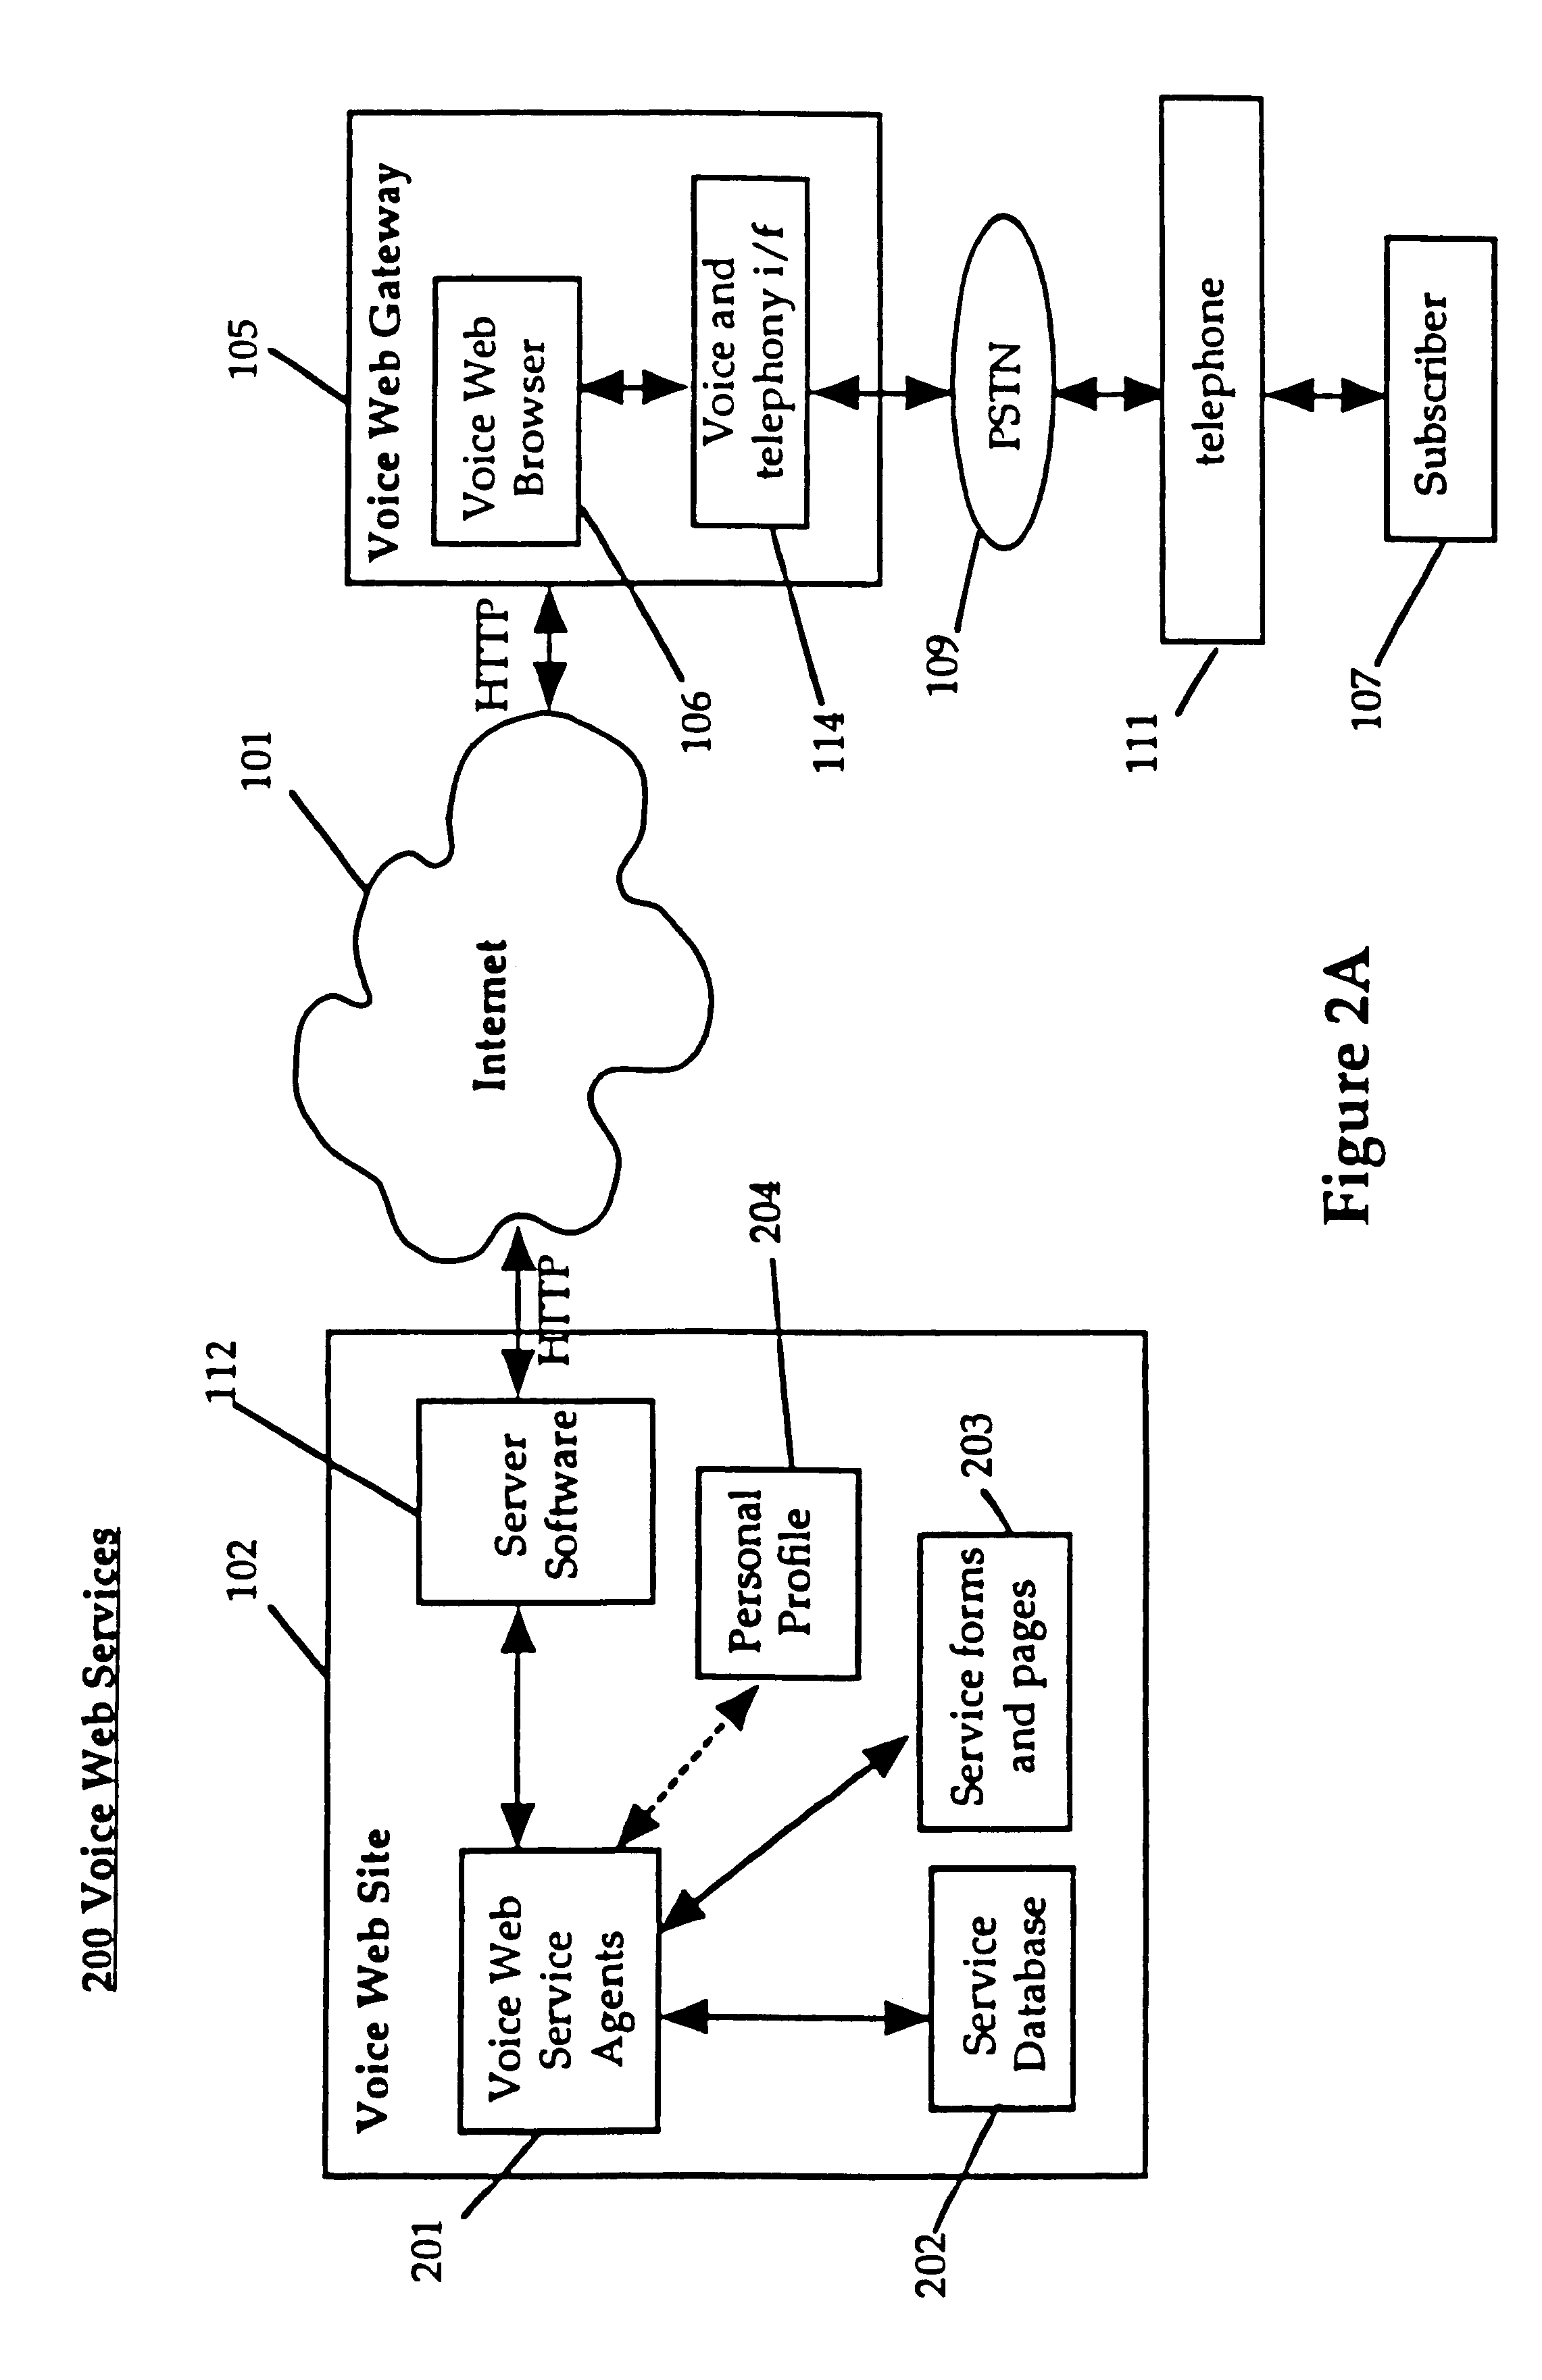 System and method for providing and using universally accessible voice and speech data files